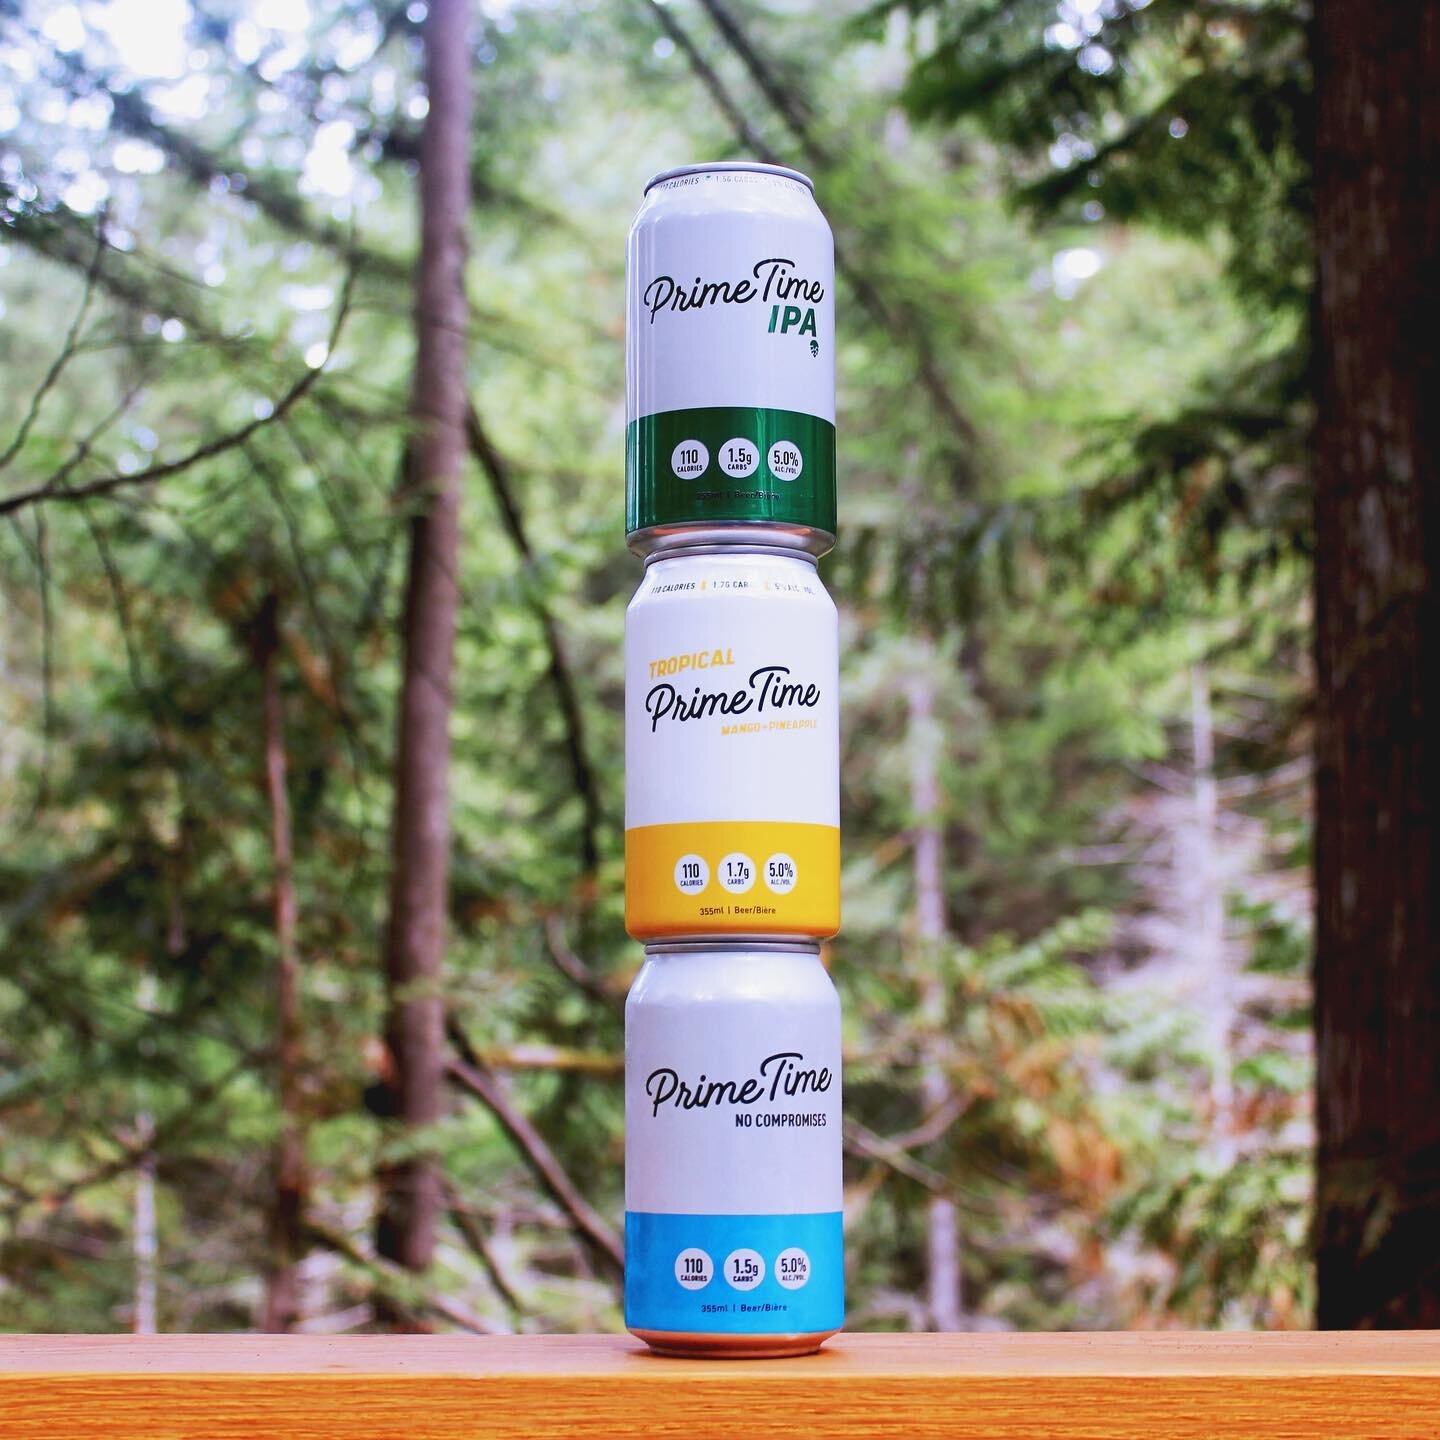 Have your weekend stack ready?
🚨 Contest Alert! 🚨 
Comment below and tell us your go to PrimeTime between Original, Tropical, and IPA. A lucky commenter will will some free PrimeTime Swag! (Eligible for BC residents).